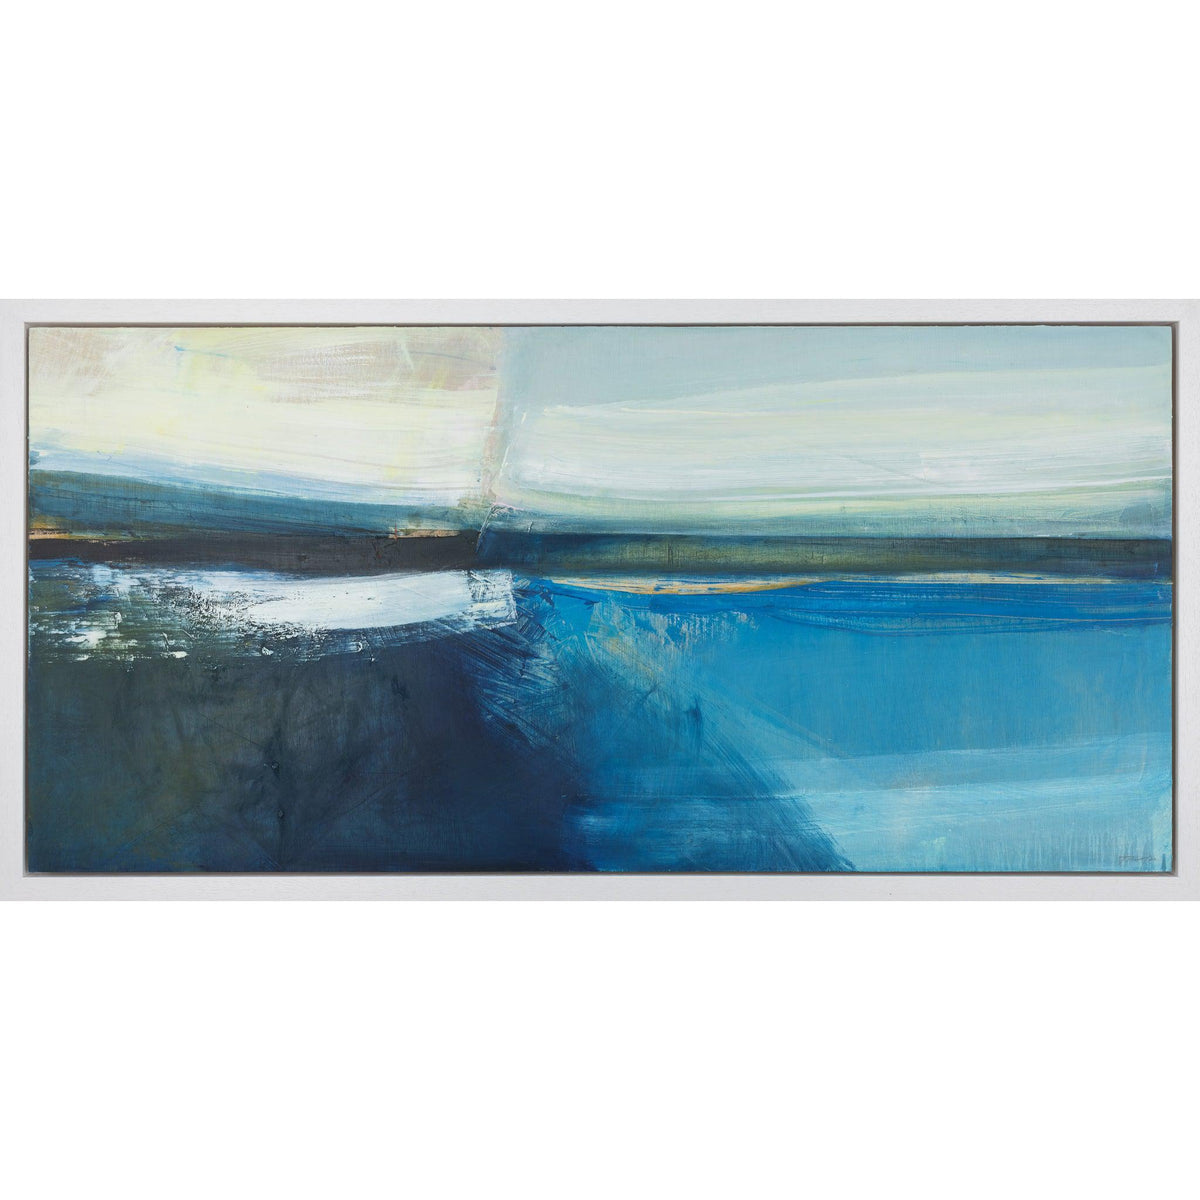 &#39;Latitude&#39; oil original by Justine Lois Thorpe, available at Padstow Gallery, Cornwall